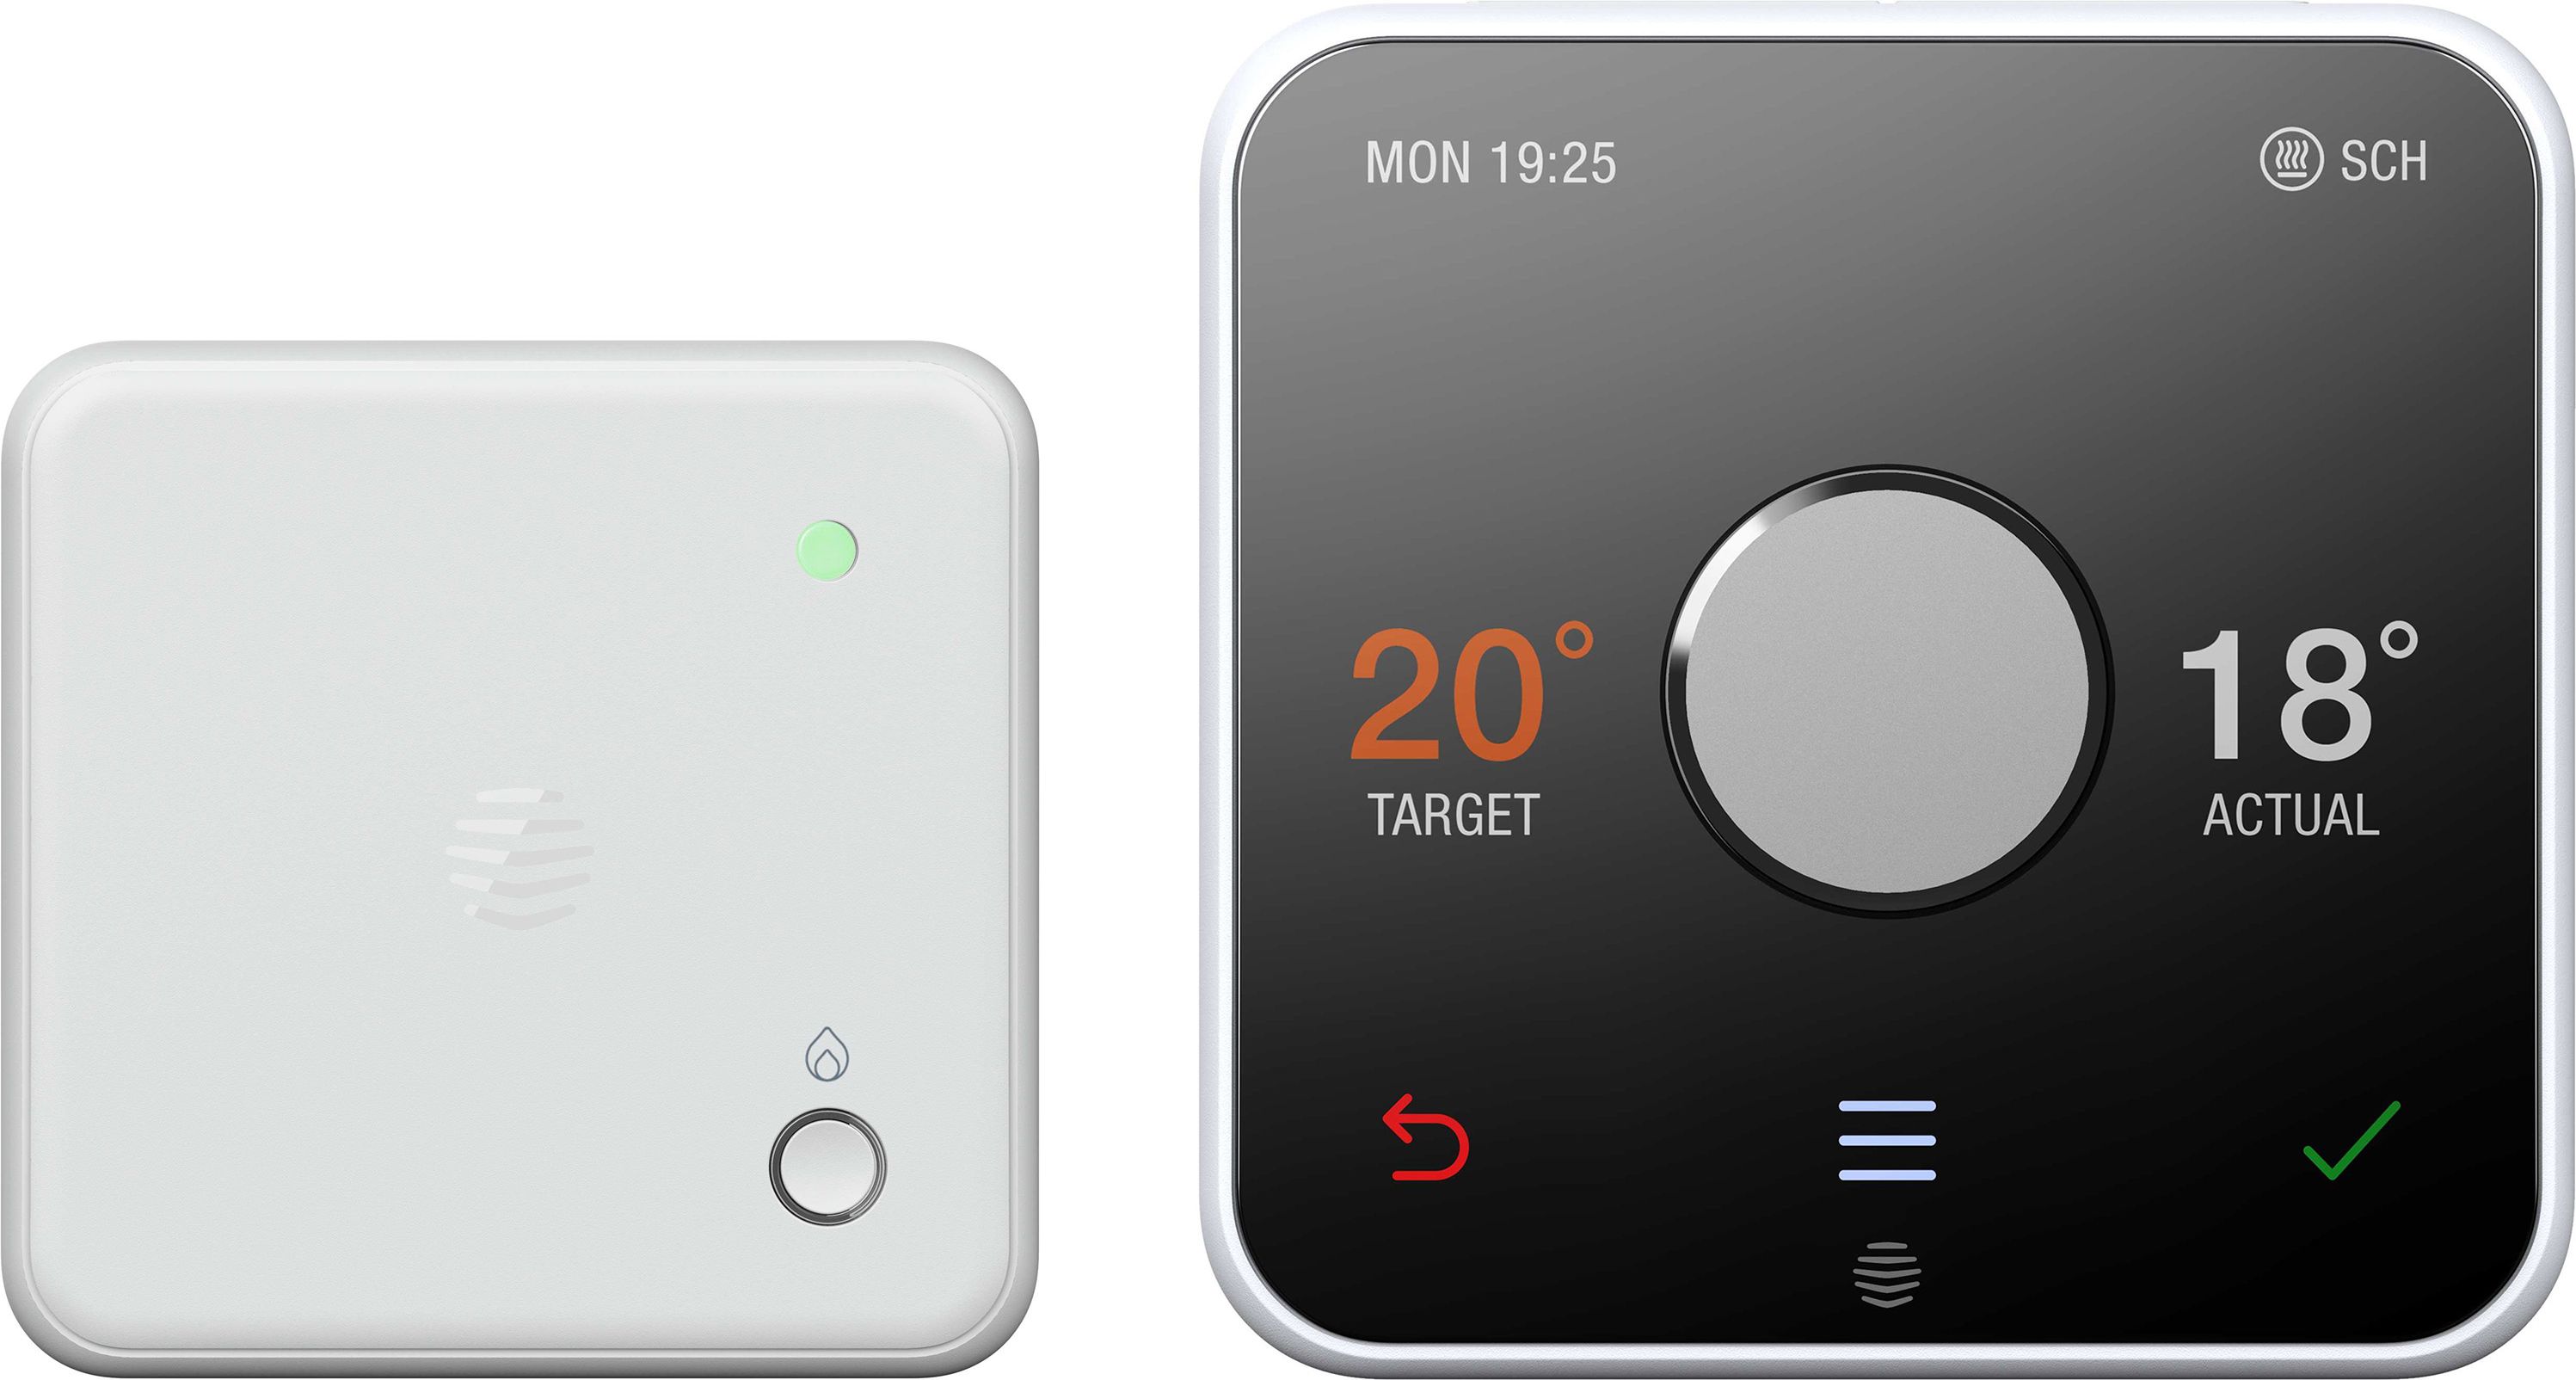 Hive Active Heating For Combi Boiler Smart Thermostat - Requires Professional Install - White, White